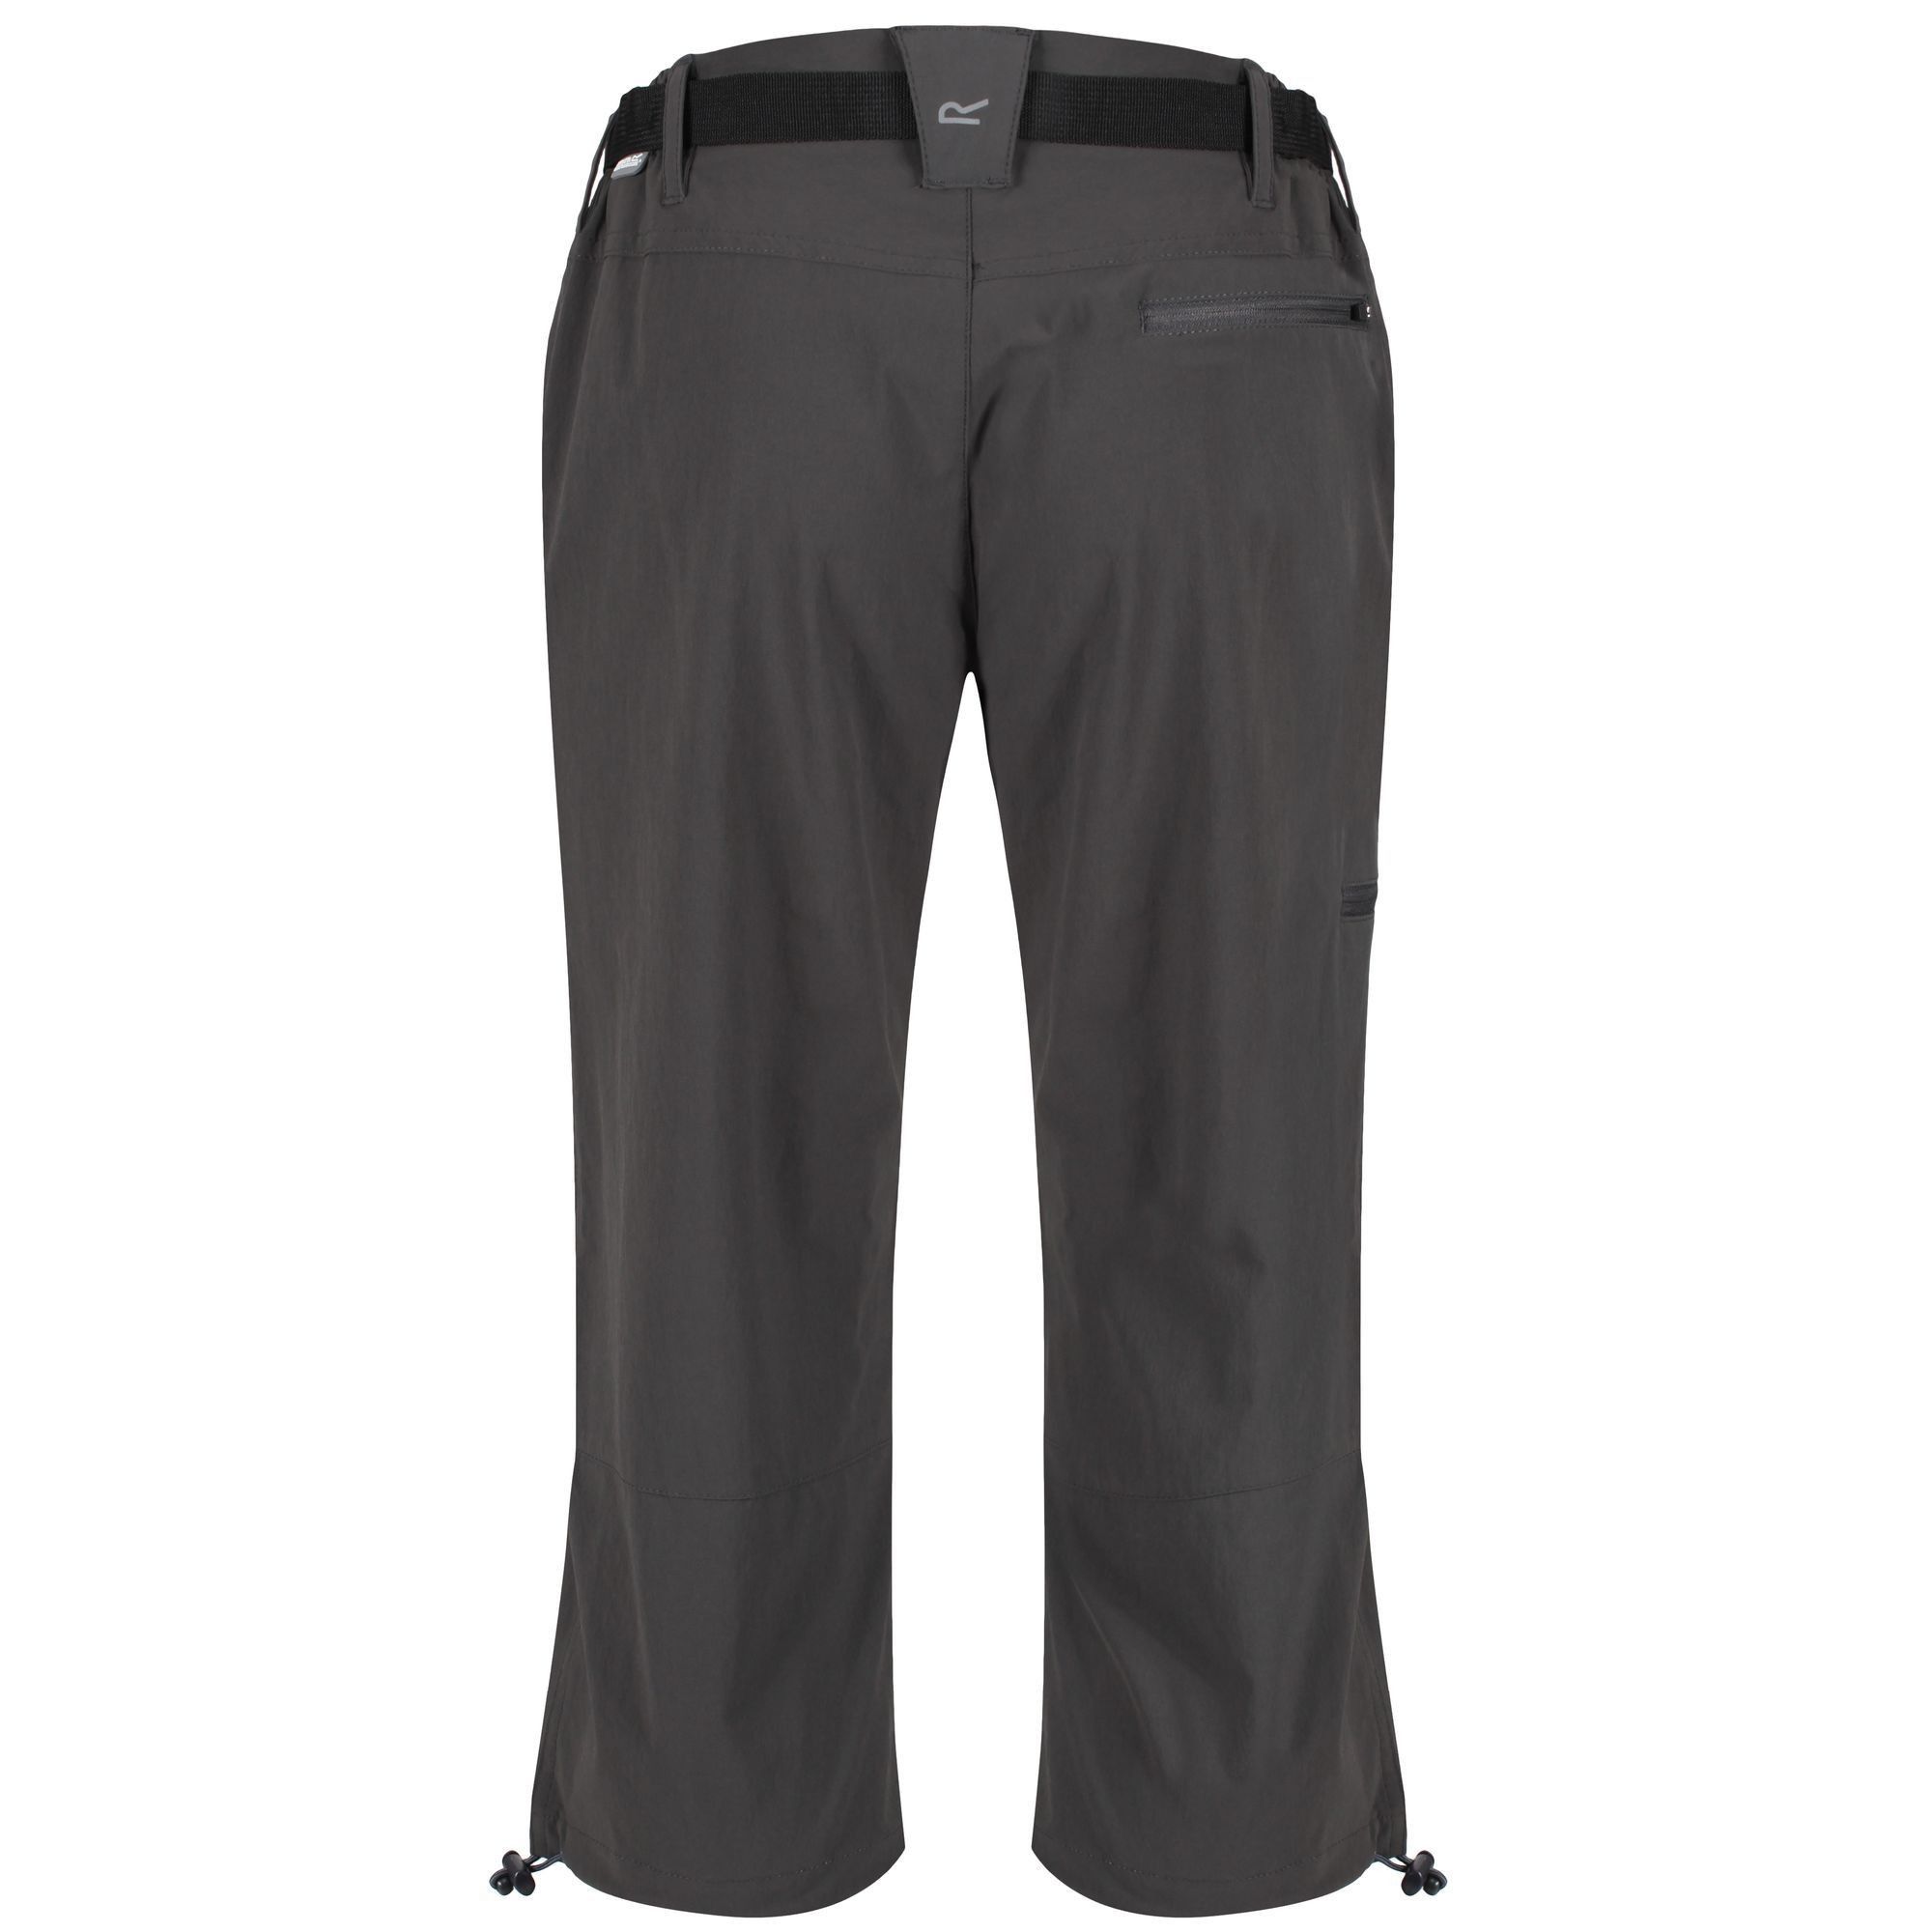 ISOFLEX - Active stretch fabric. 4-way stretch for increased movement and comfort. Durable water repellent finish. Quick dry for enhanced confort. Lightweight - for active performance. Part elasticated waist with webbing belt. Multi pocketed - front and rear zipped pockets. Drawcord at leg hems. Engineered and intelligent ergonomic fit. Regatta Womens sizing (waist approx): 6 (23in/58cm), 8 (25in/63cm), 10 (27in/68cm), 12 (29in/74cm), 14 (31in/79cm), 16 (33in/84cm), 18 (36in/91cm), 20 (38in/96cm), 22 (41in/104cm), 24 (43in/109cm), 26 (45in/114cm), 28 (47in/119cm), 30 (49in/124cm), 32 (51in/129cm), 34 (53in/135cm), 36 (55in/140cm). 85% Polyamide, 15% Elastane.